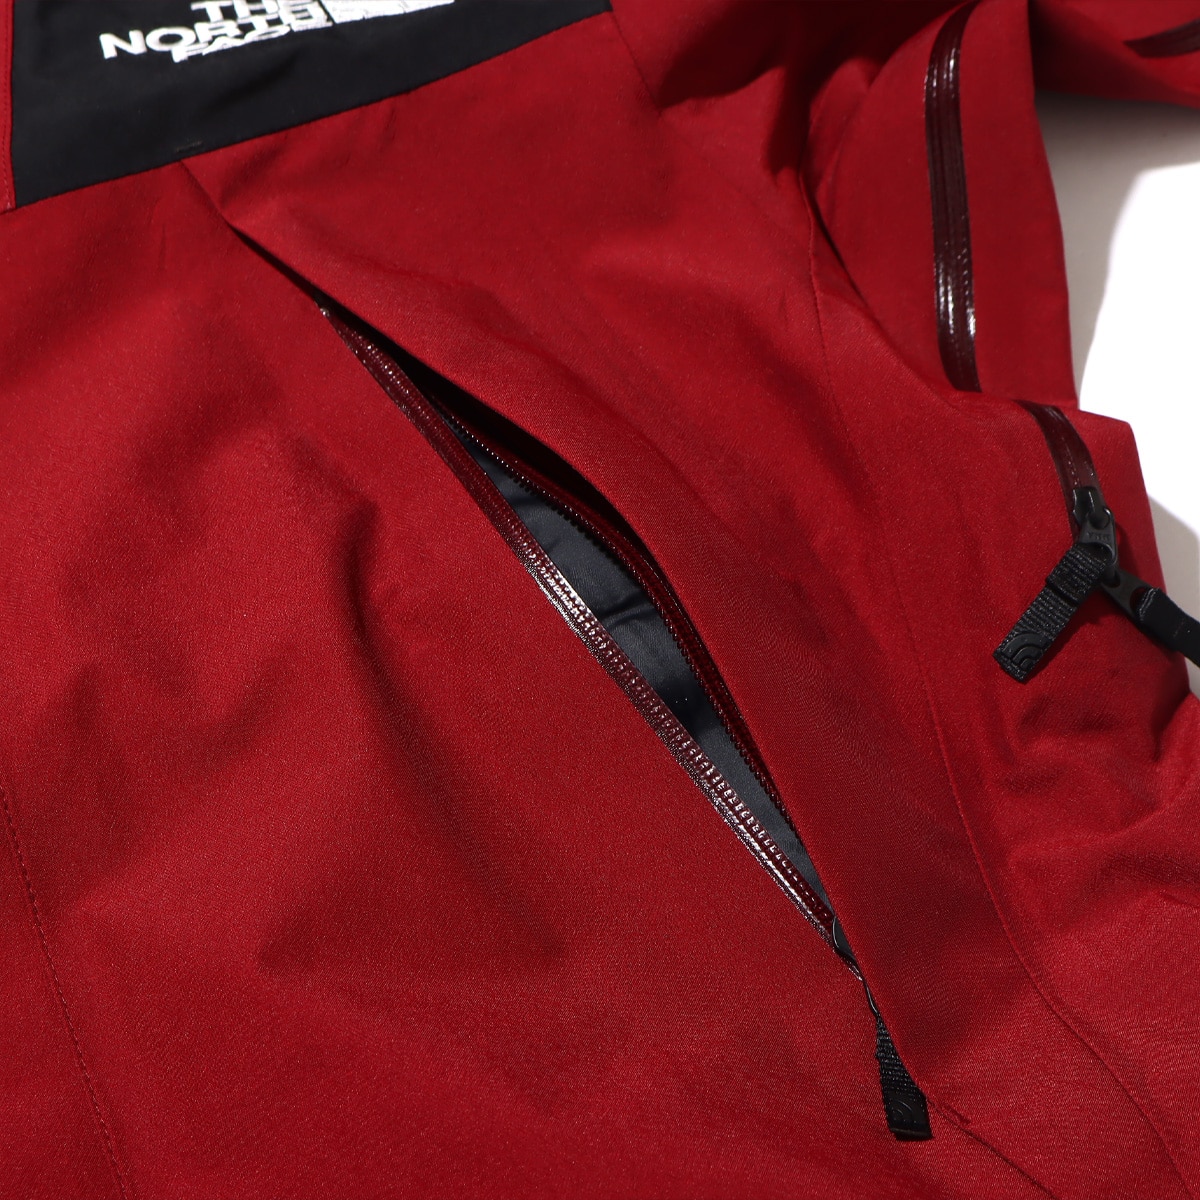 THE NORTH FACE MOUNTAIN JACKET コードバン 22FW-I